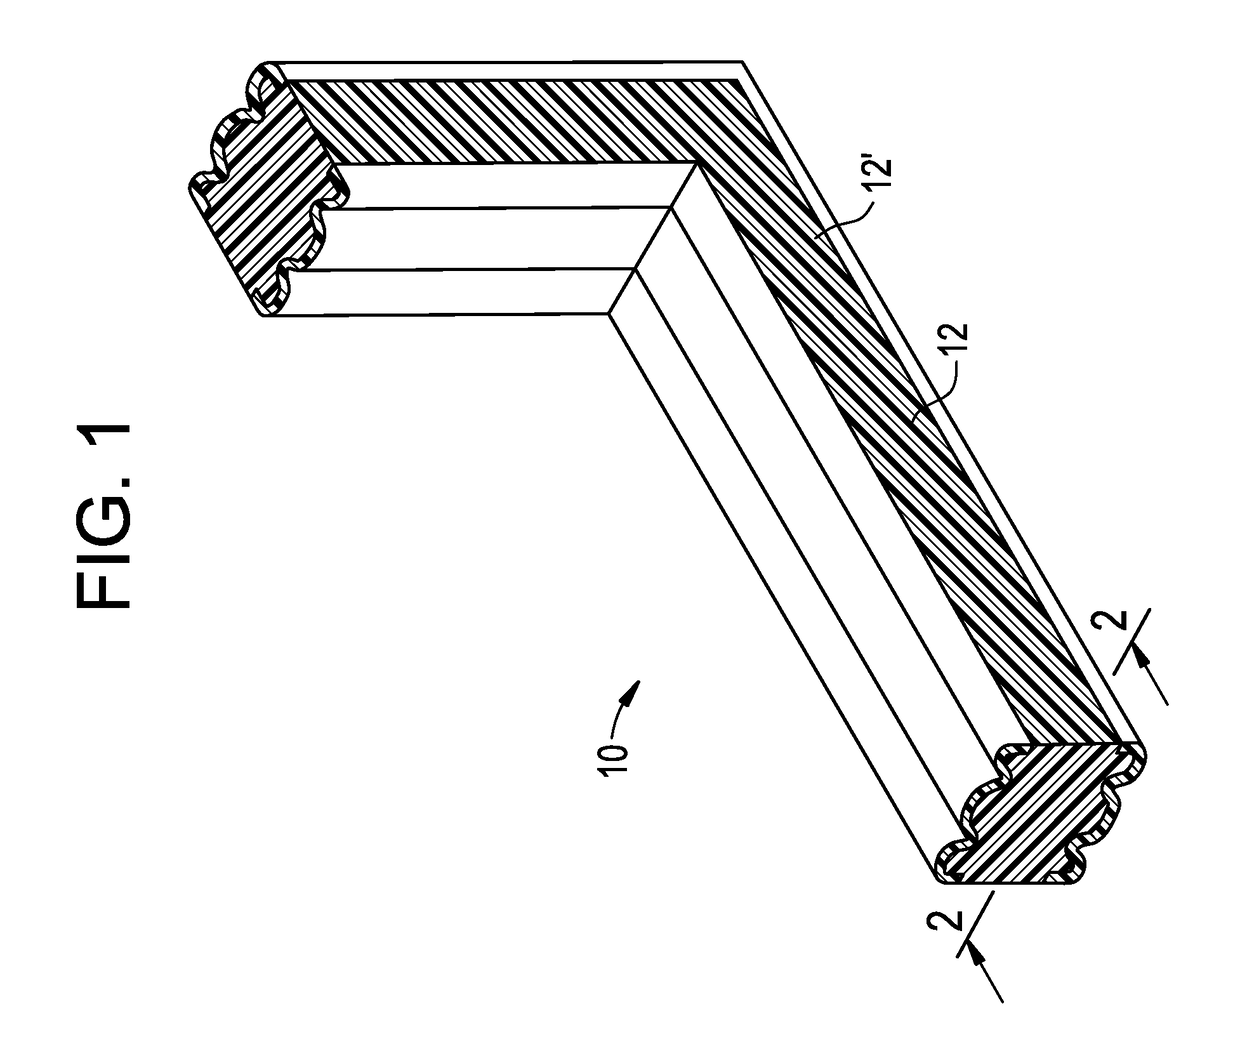 Precompressed water and/or fire resistant tunnel expansion joint systems, and transitions